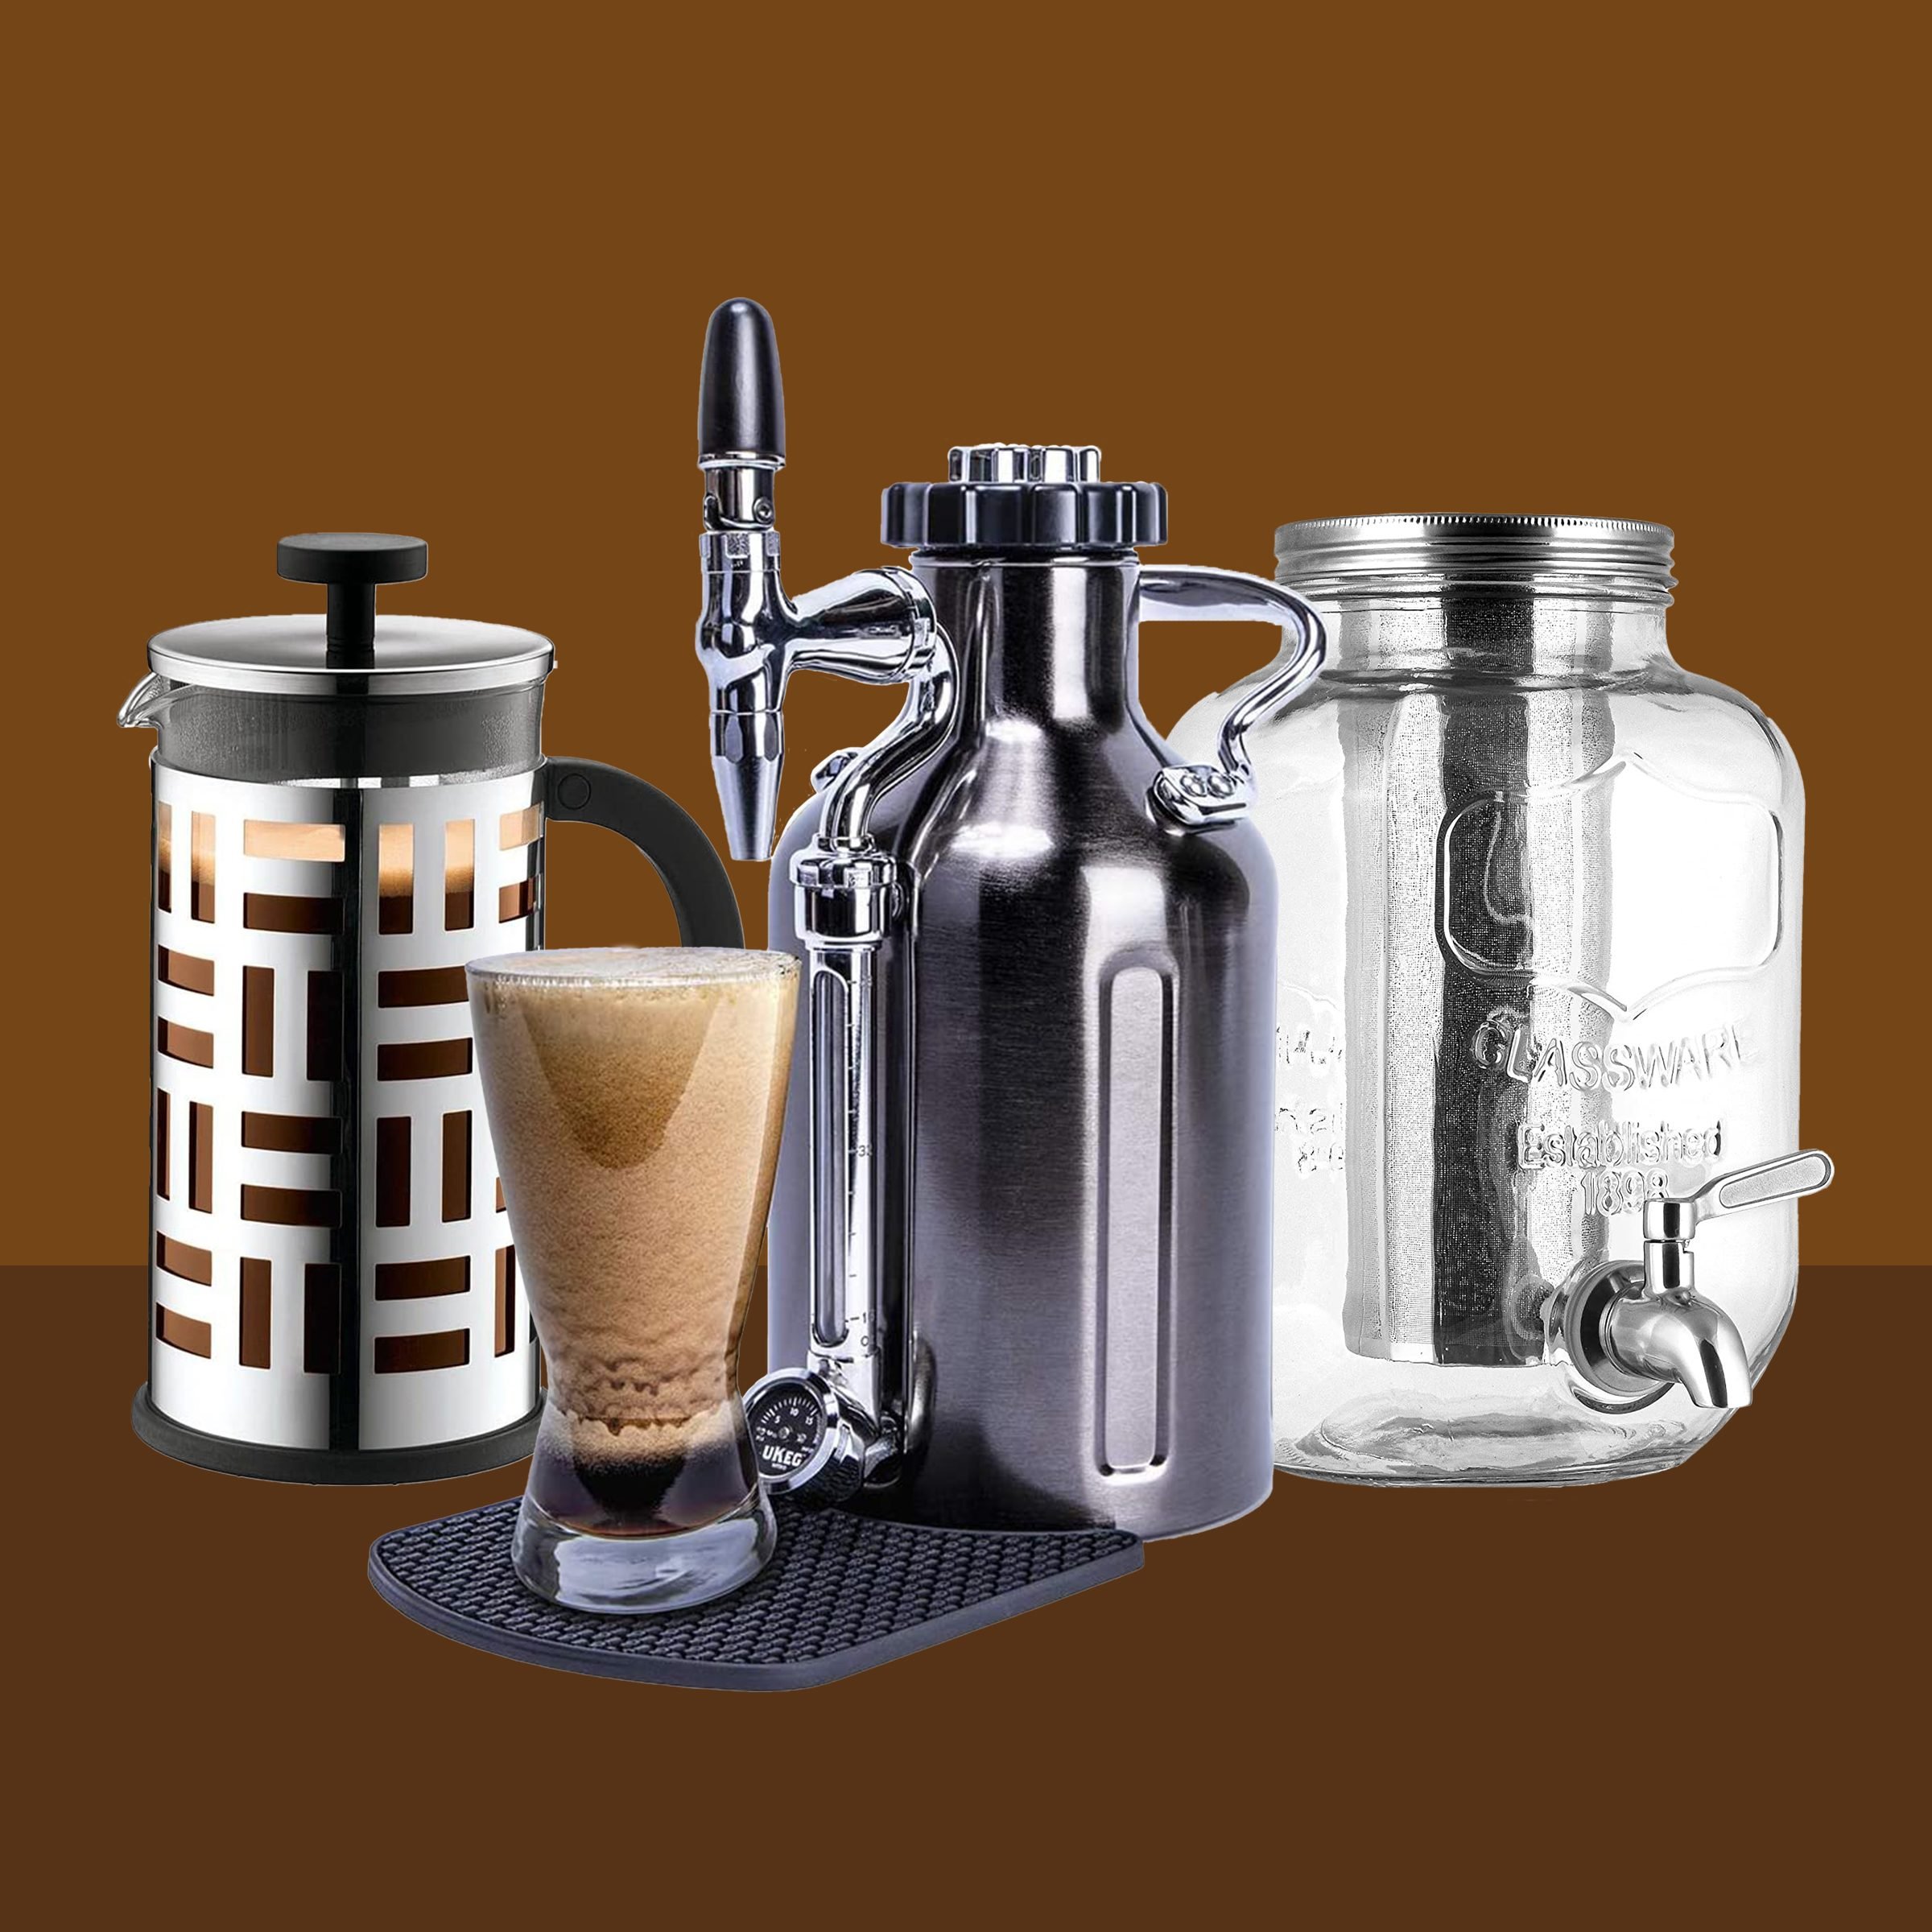 https://www.rd.com/wp-content/uploads/2019/08/8-Best-Cold-Brew-Coffee-Makers-for-a-Perfect-Cup-of-Joe-Opener.jpg